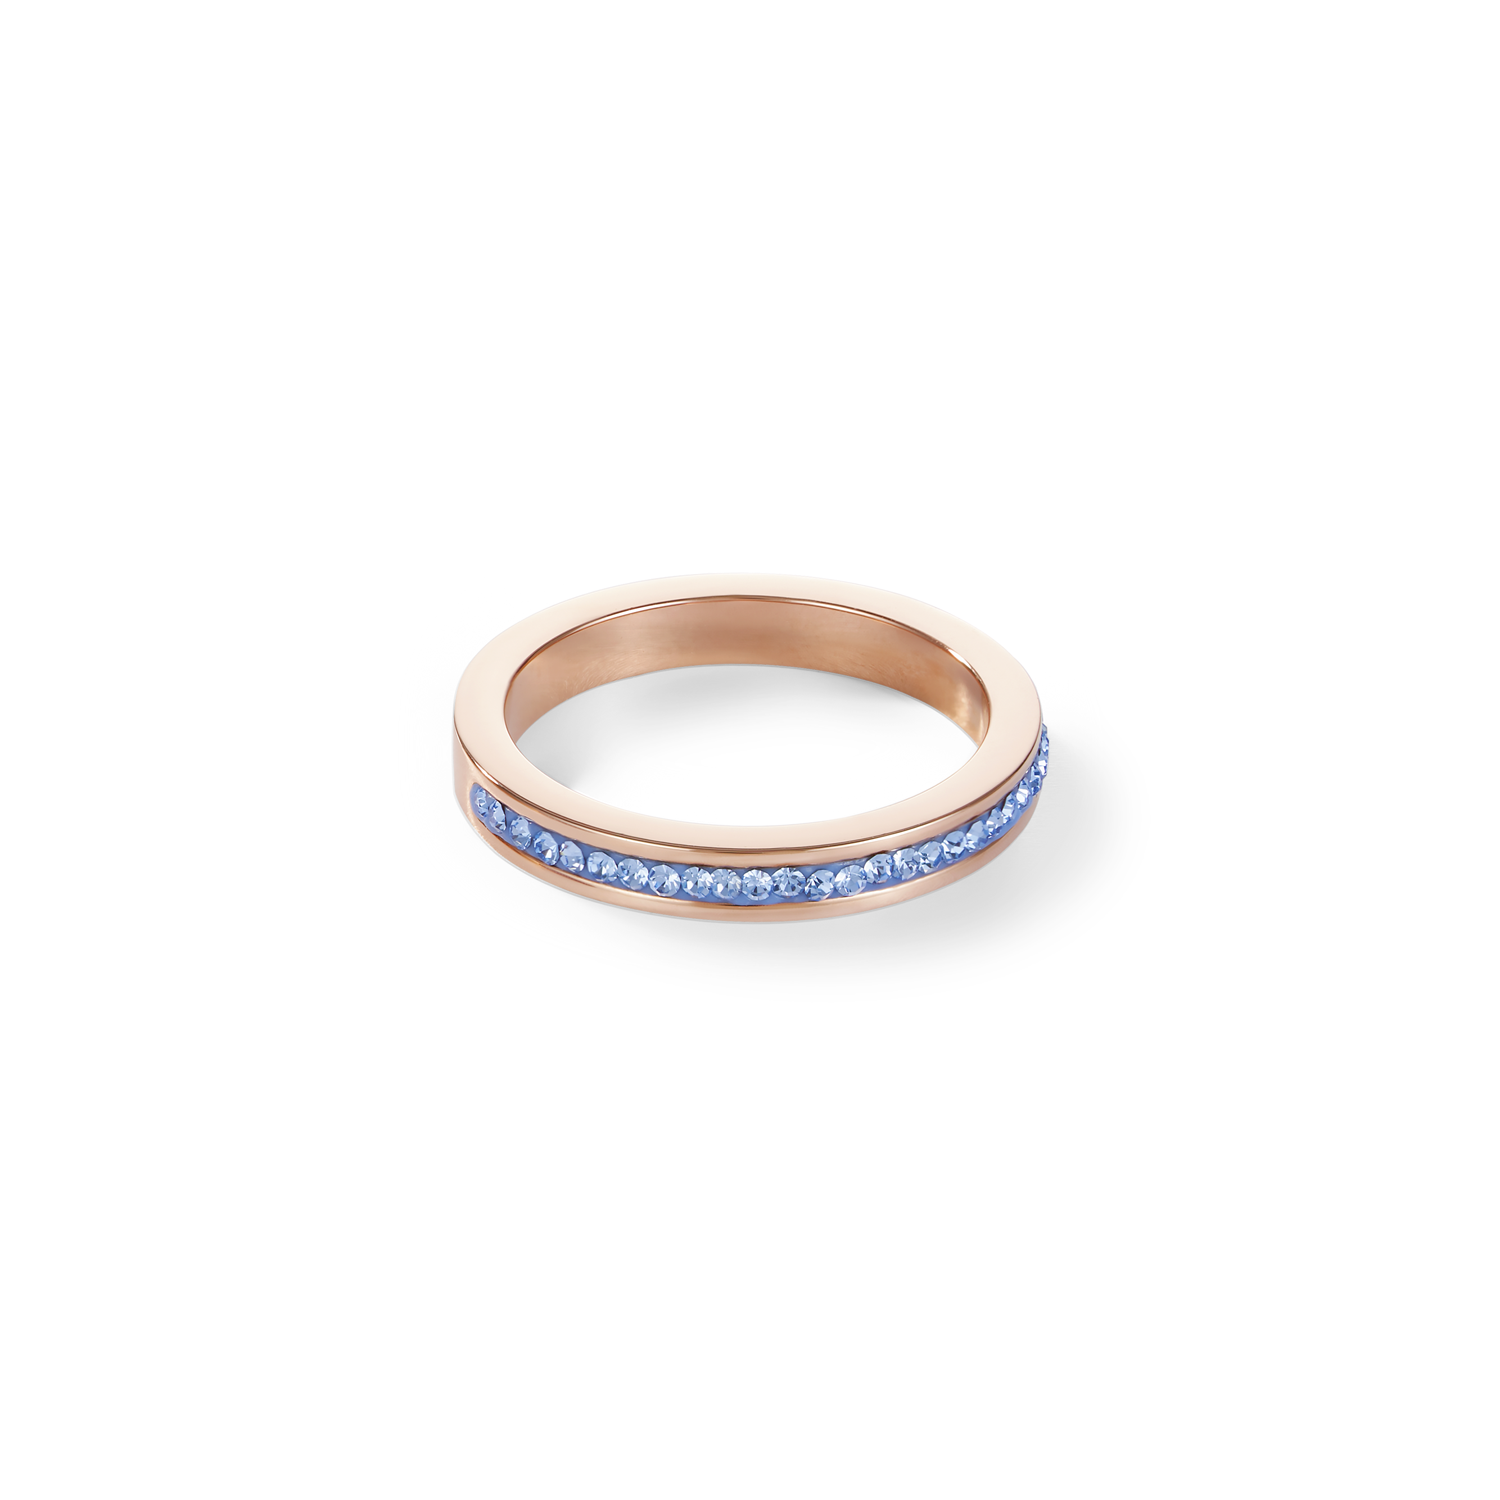 Ring slim stainless steel rose gold & crystals pavé light blue